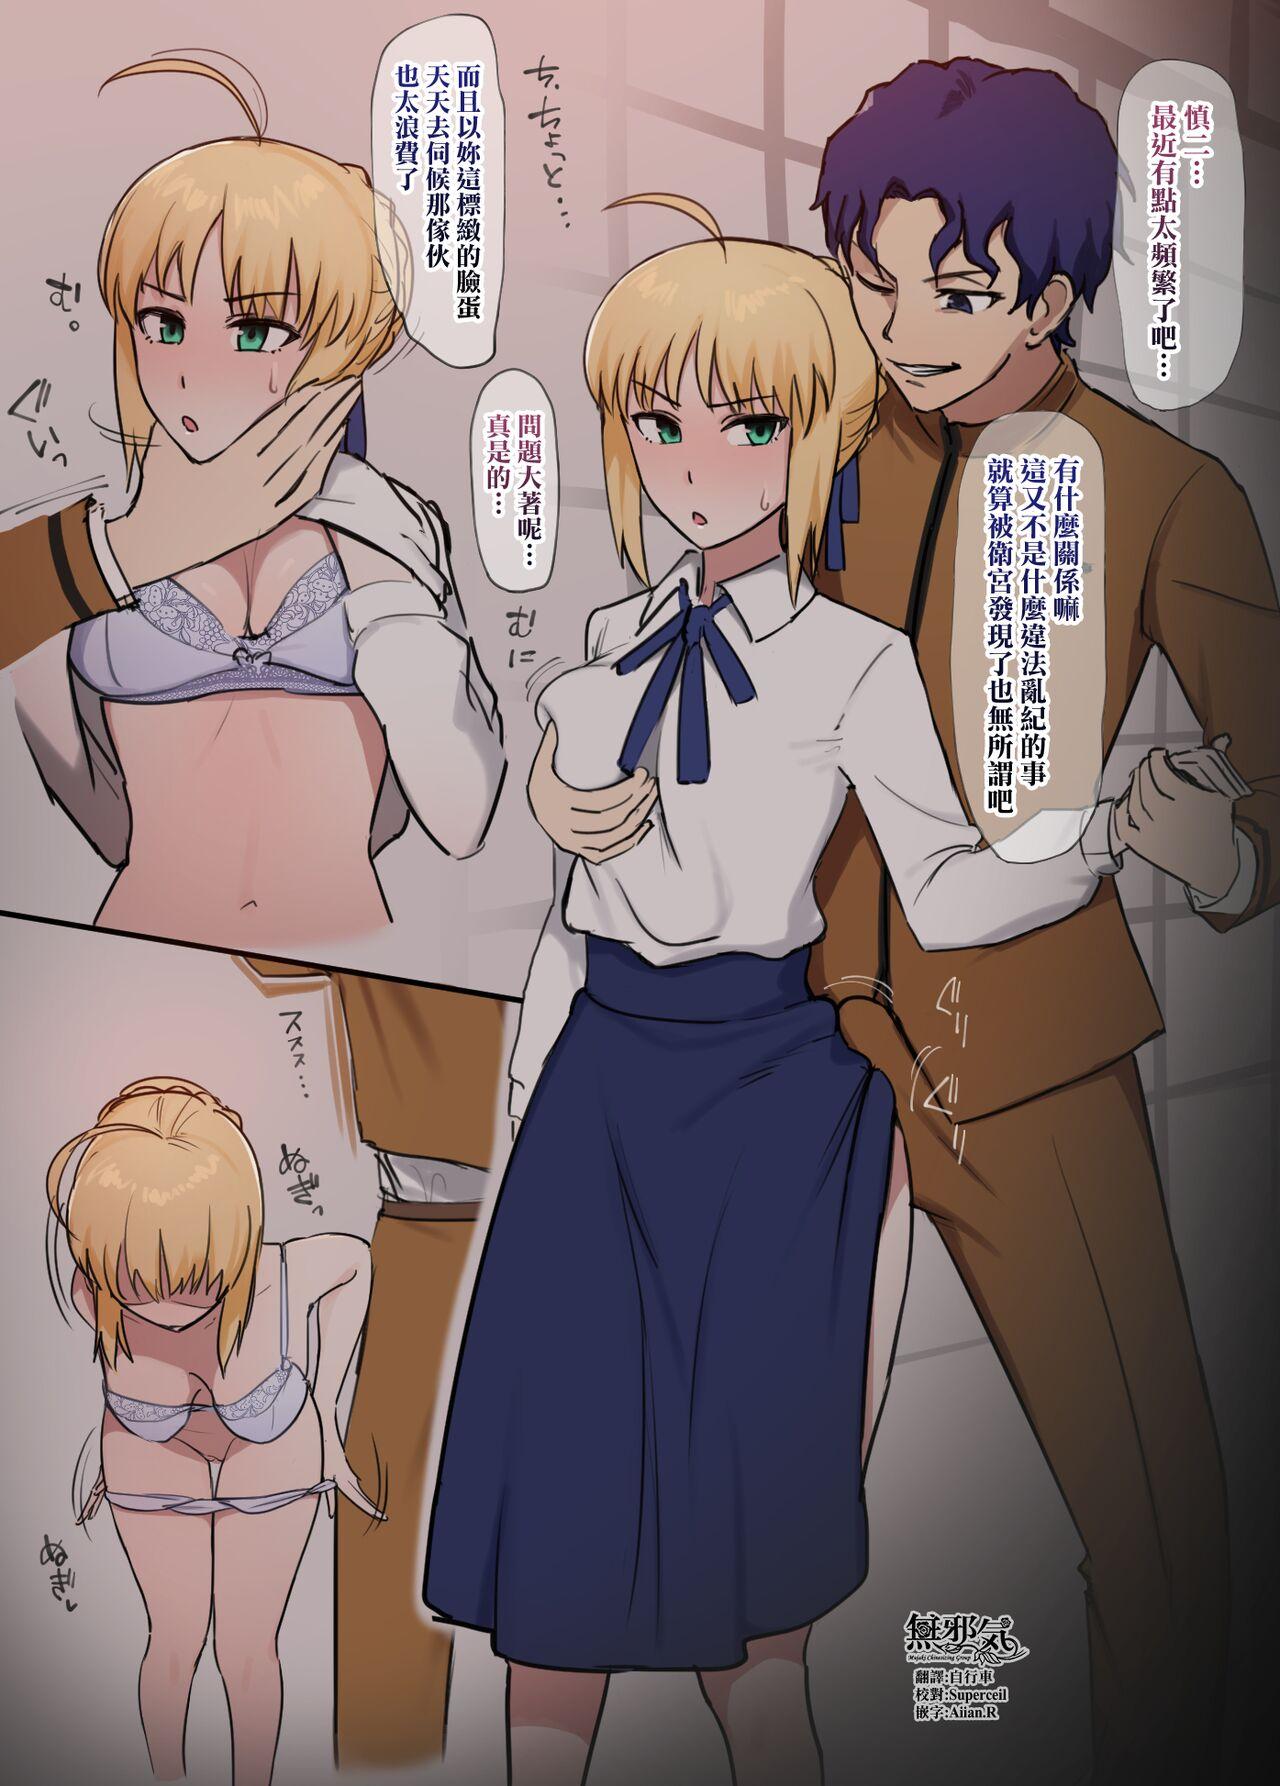 Class Room 慎二×セイバーntr - Fate stay night People Having Sex - Page 1